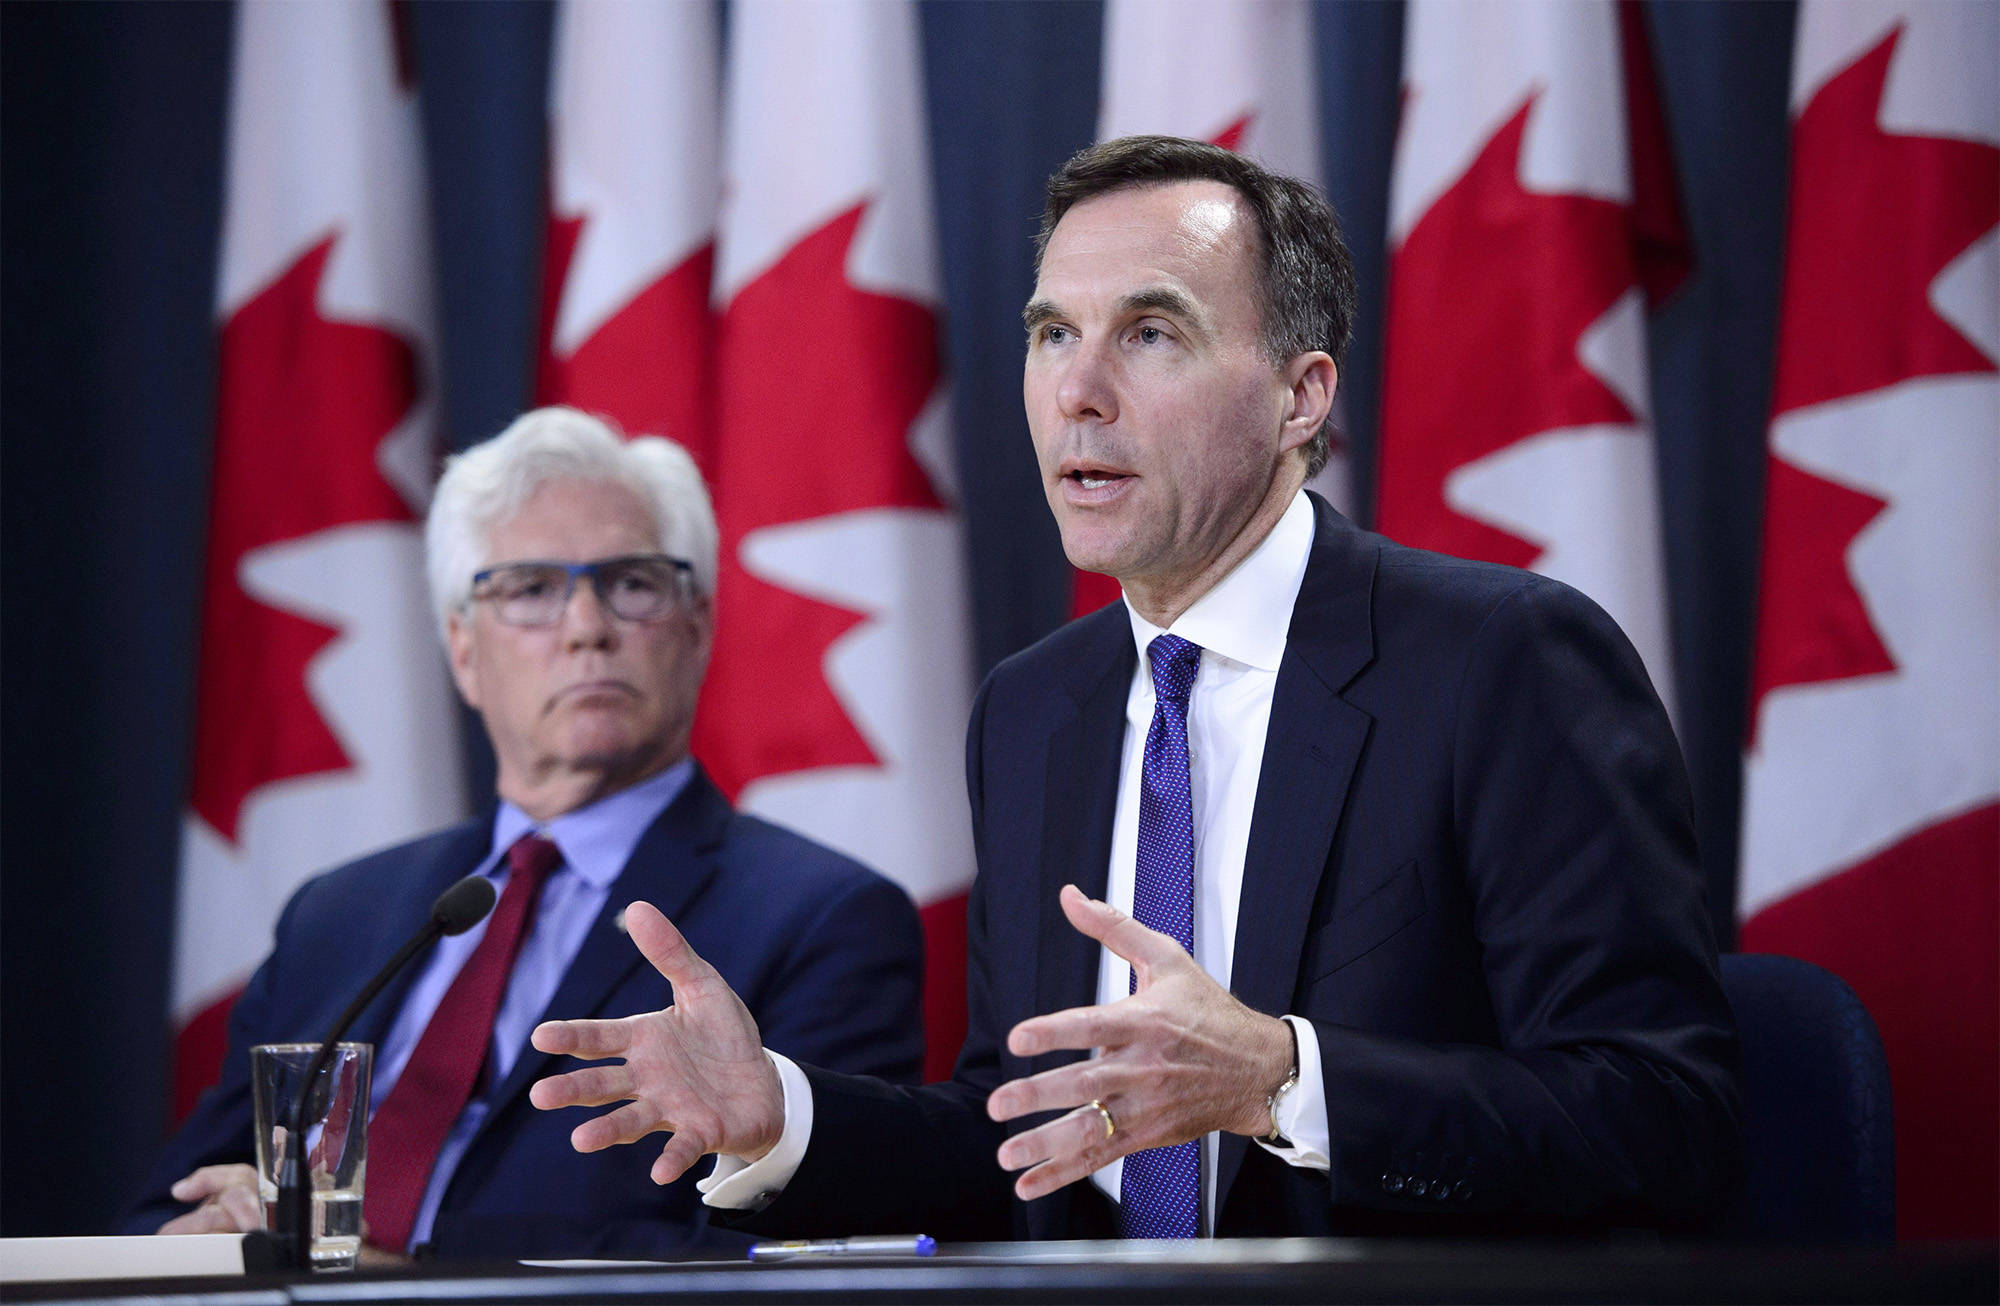 Finance Minister Bill Morneau and Natural Resources Minister James Carr speak at the National Press Theatre during a press conference in Ottawa on Tuesday, May 29, 2018. THE CANADIAN PRESS/Sean Kilpatrick